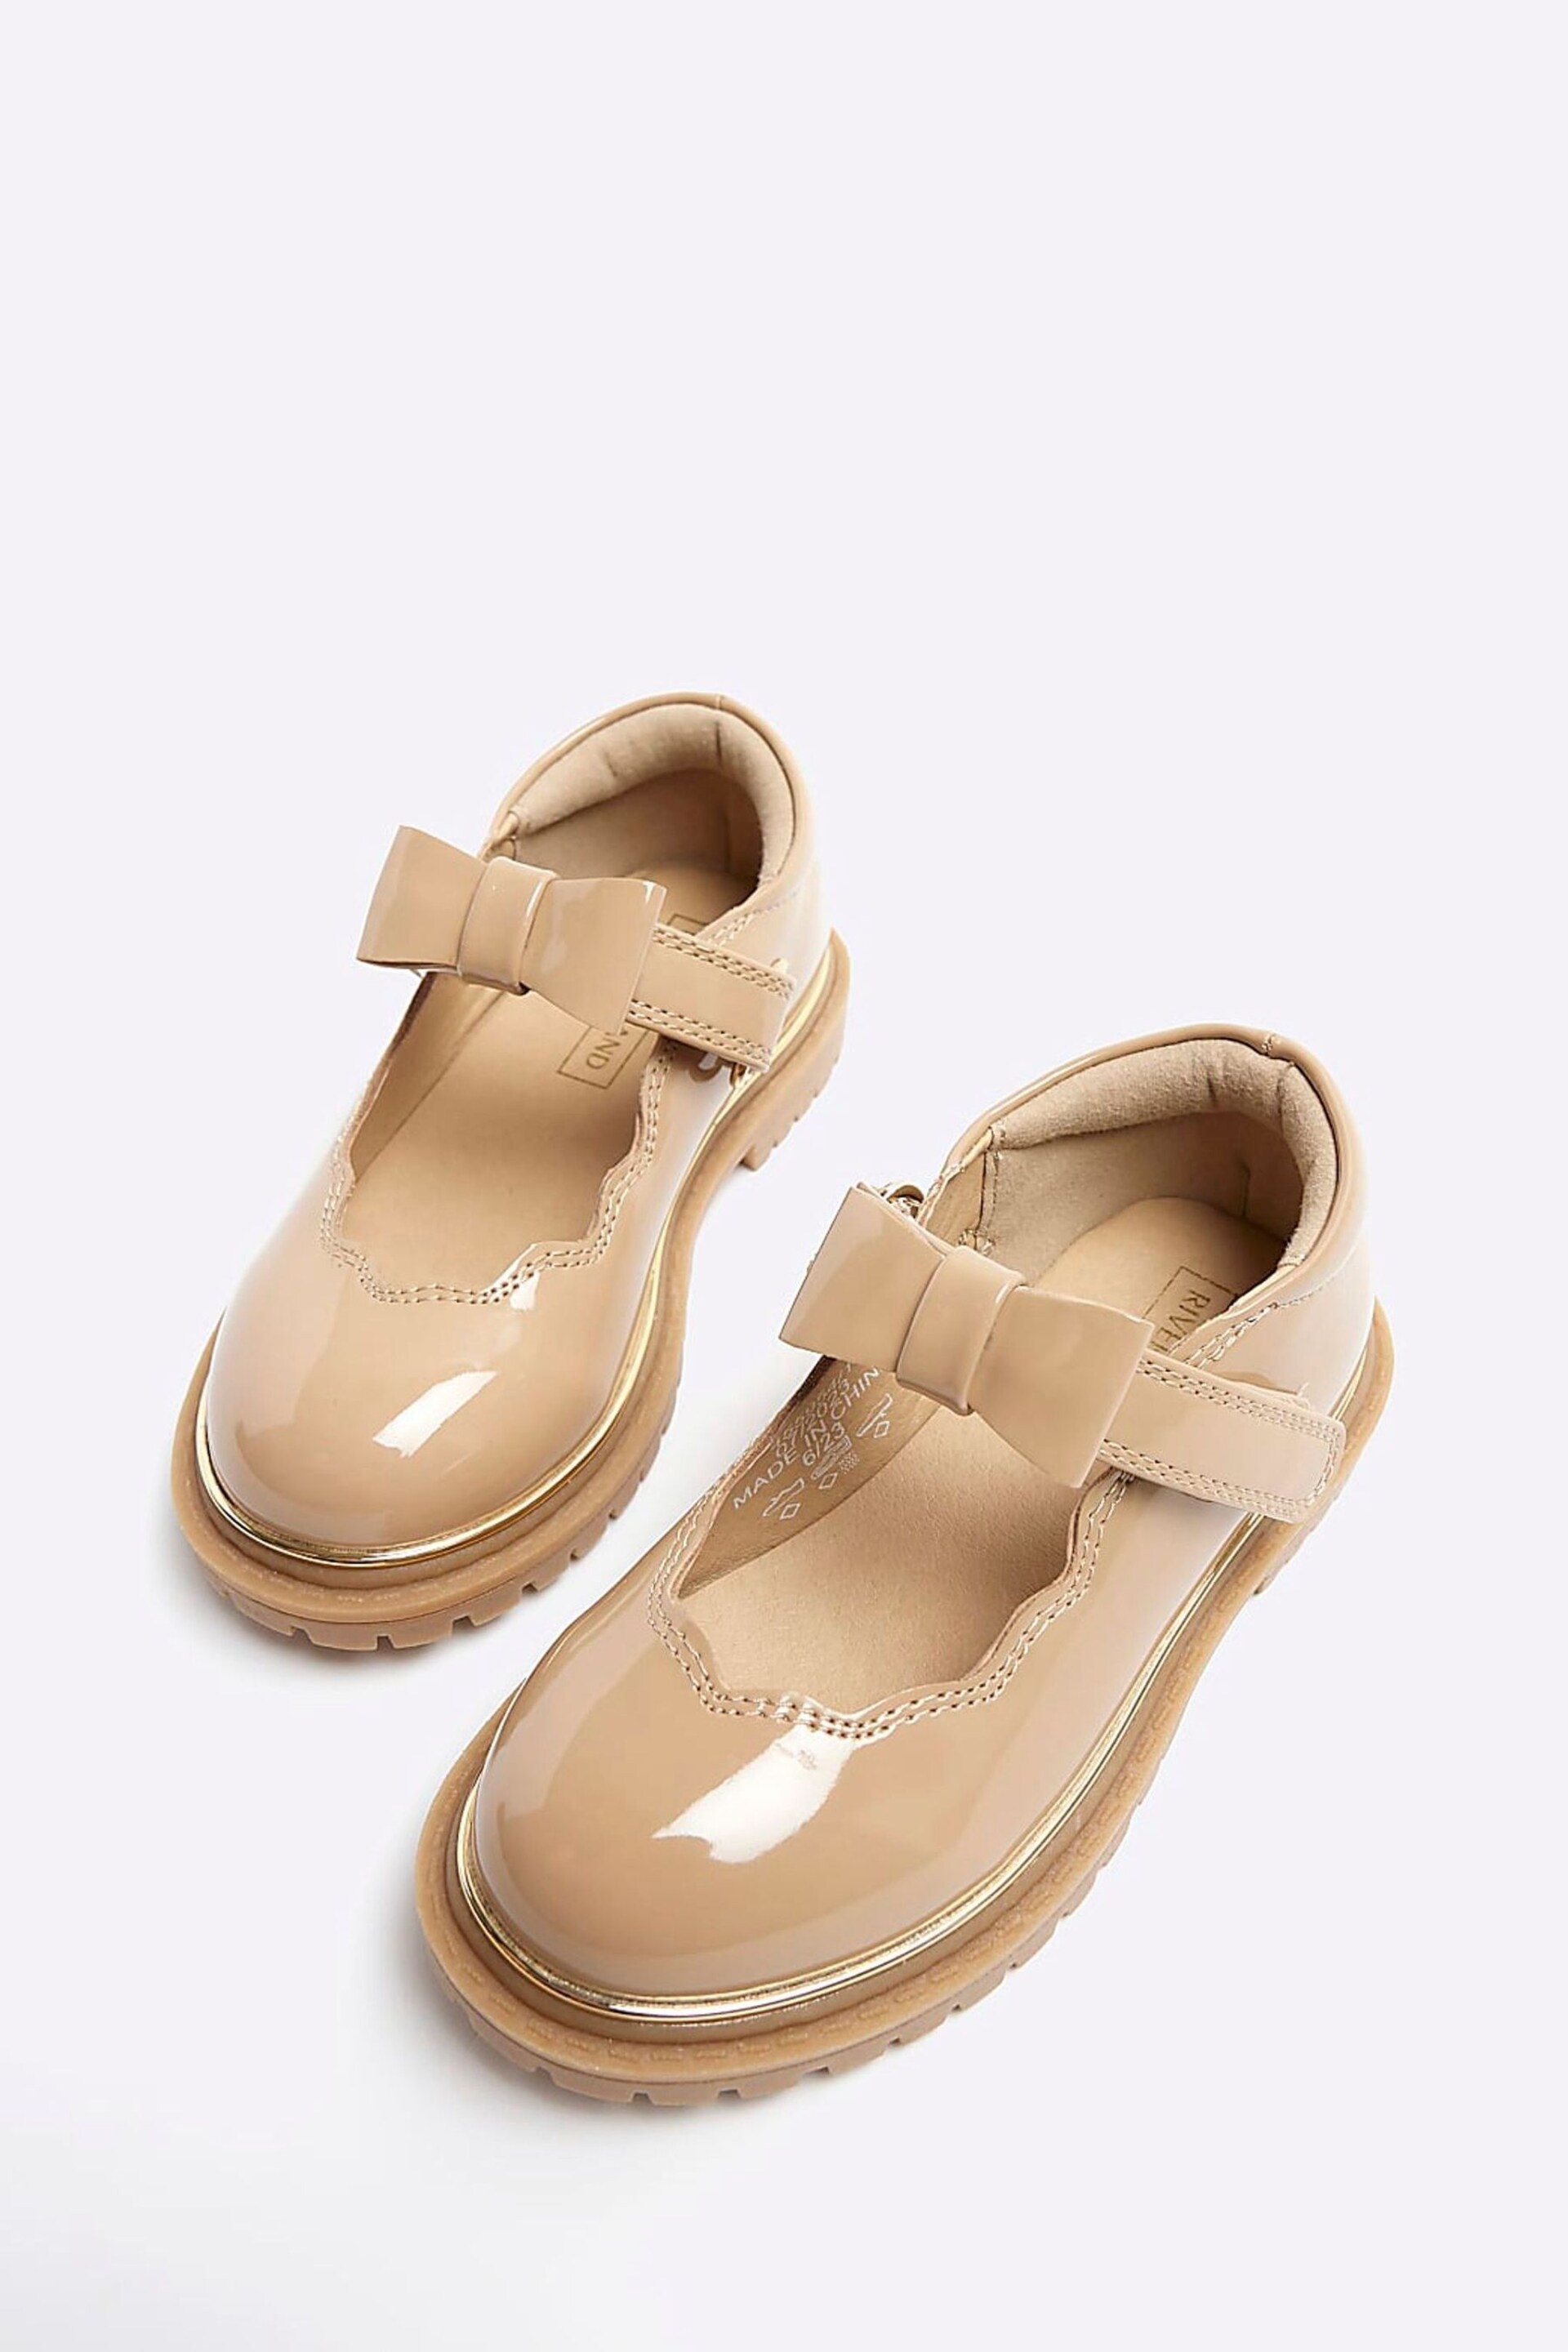 River Island Brown Girls Scallop Bow Mary Jane Shoes - Image 4 of 5